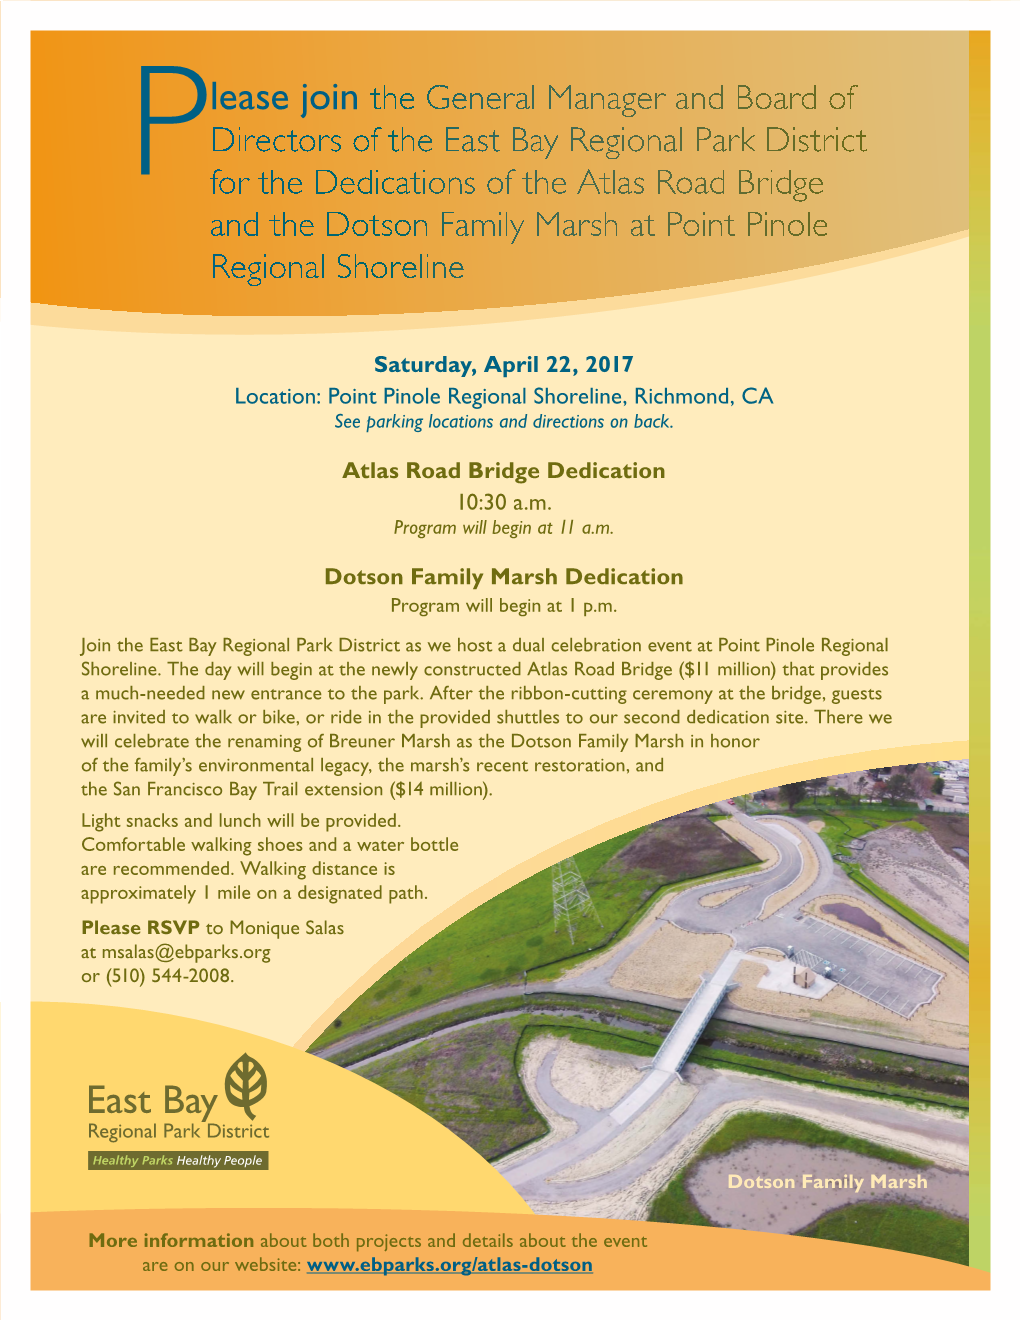 Please Join the General Manager and Board of Directors of the East Bay